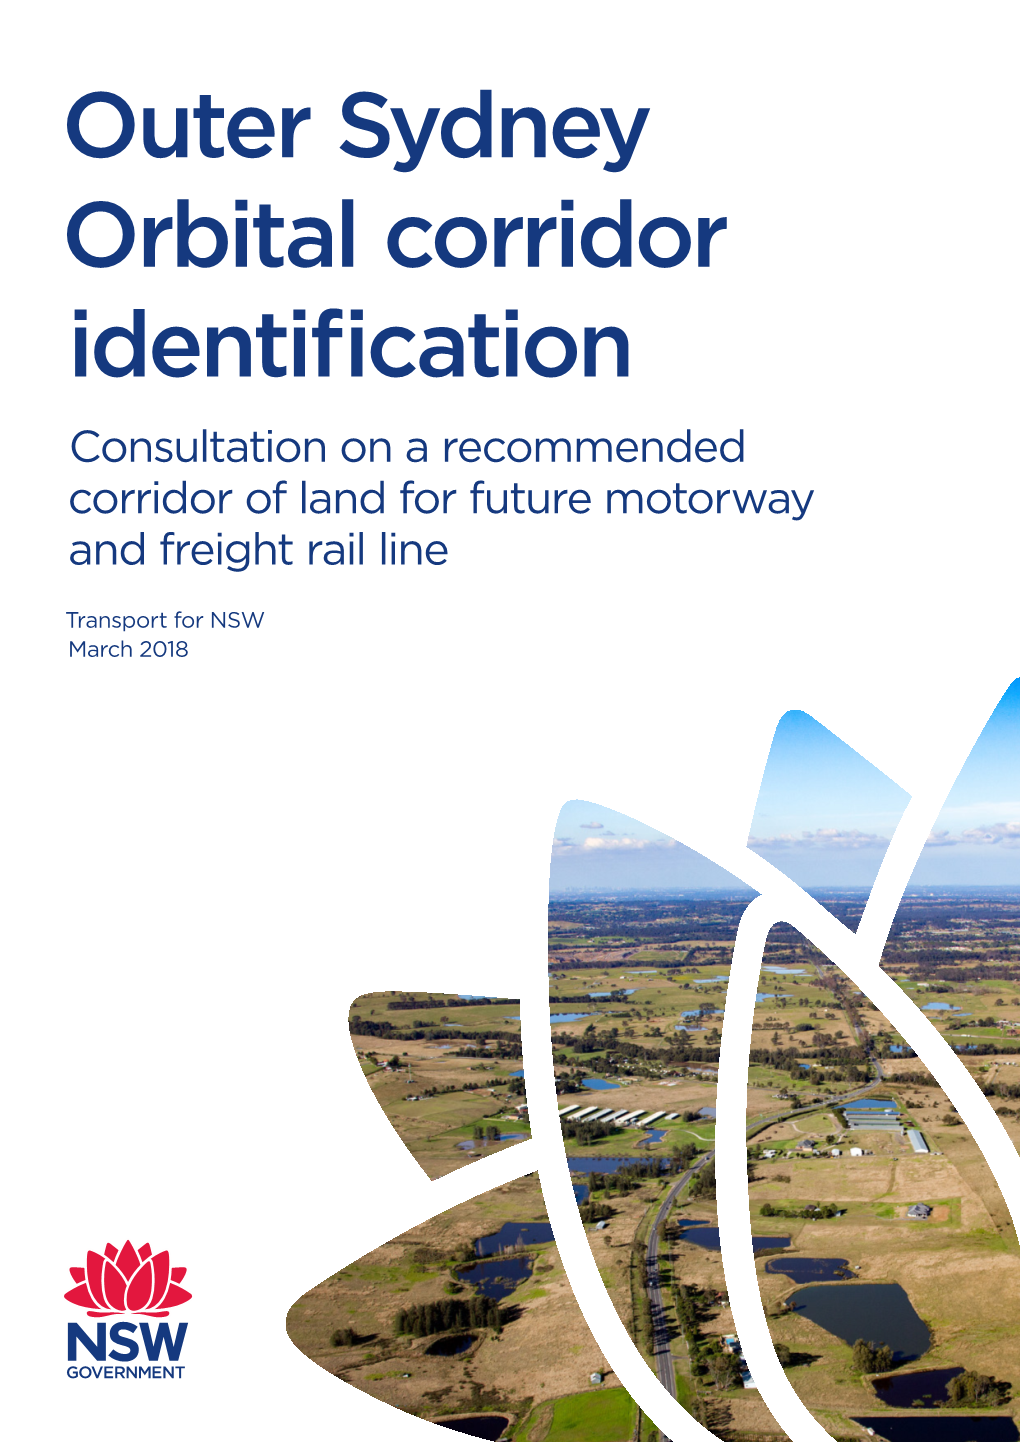 Outer Sydney Orbital Corridor Identification Consultation on a Recommended Corridor of Land for Future Motorway and Freight Rail Line